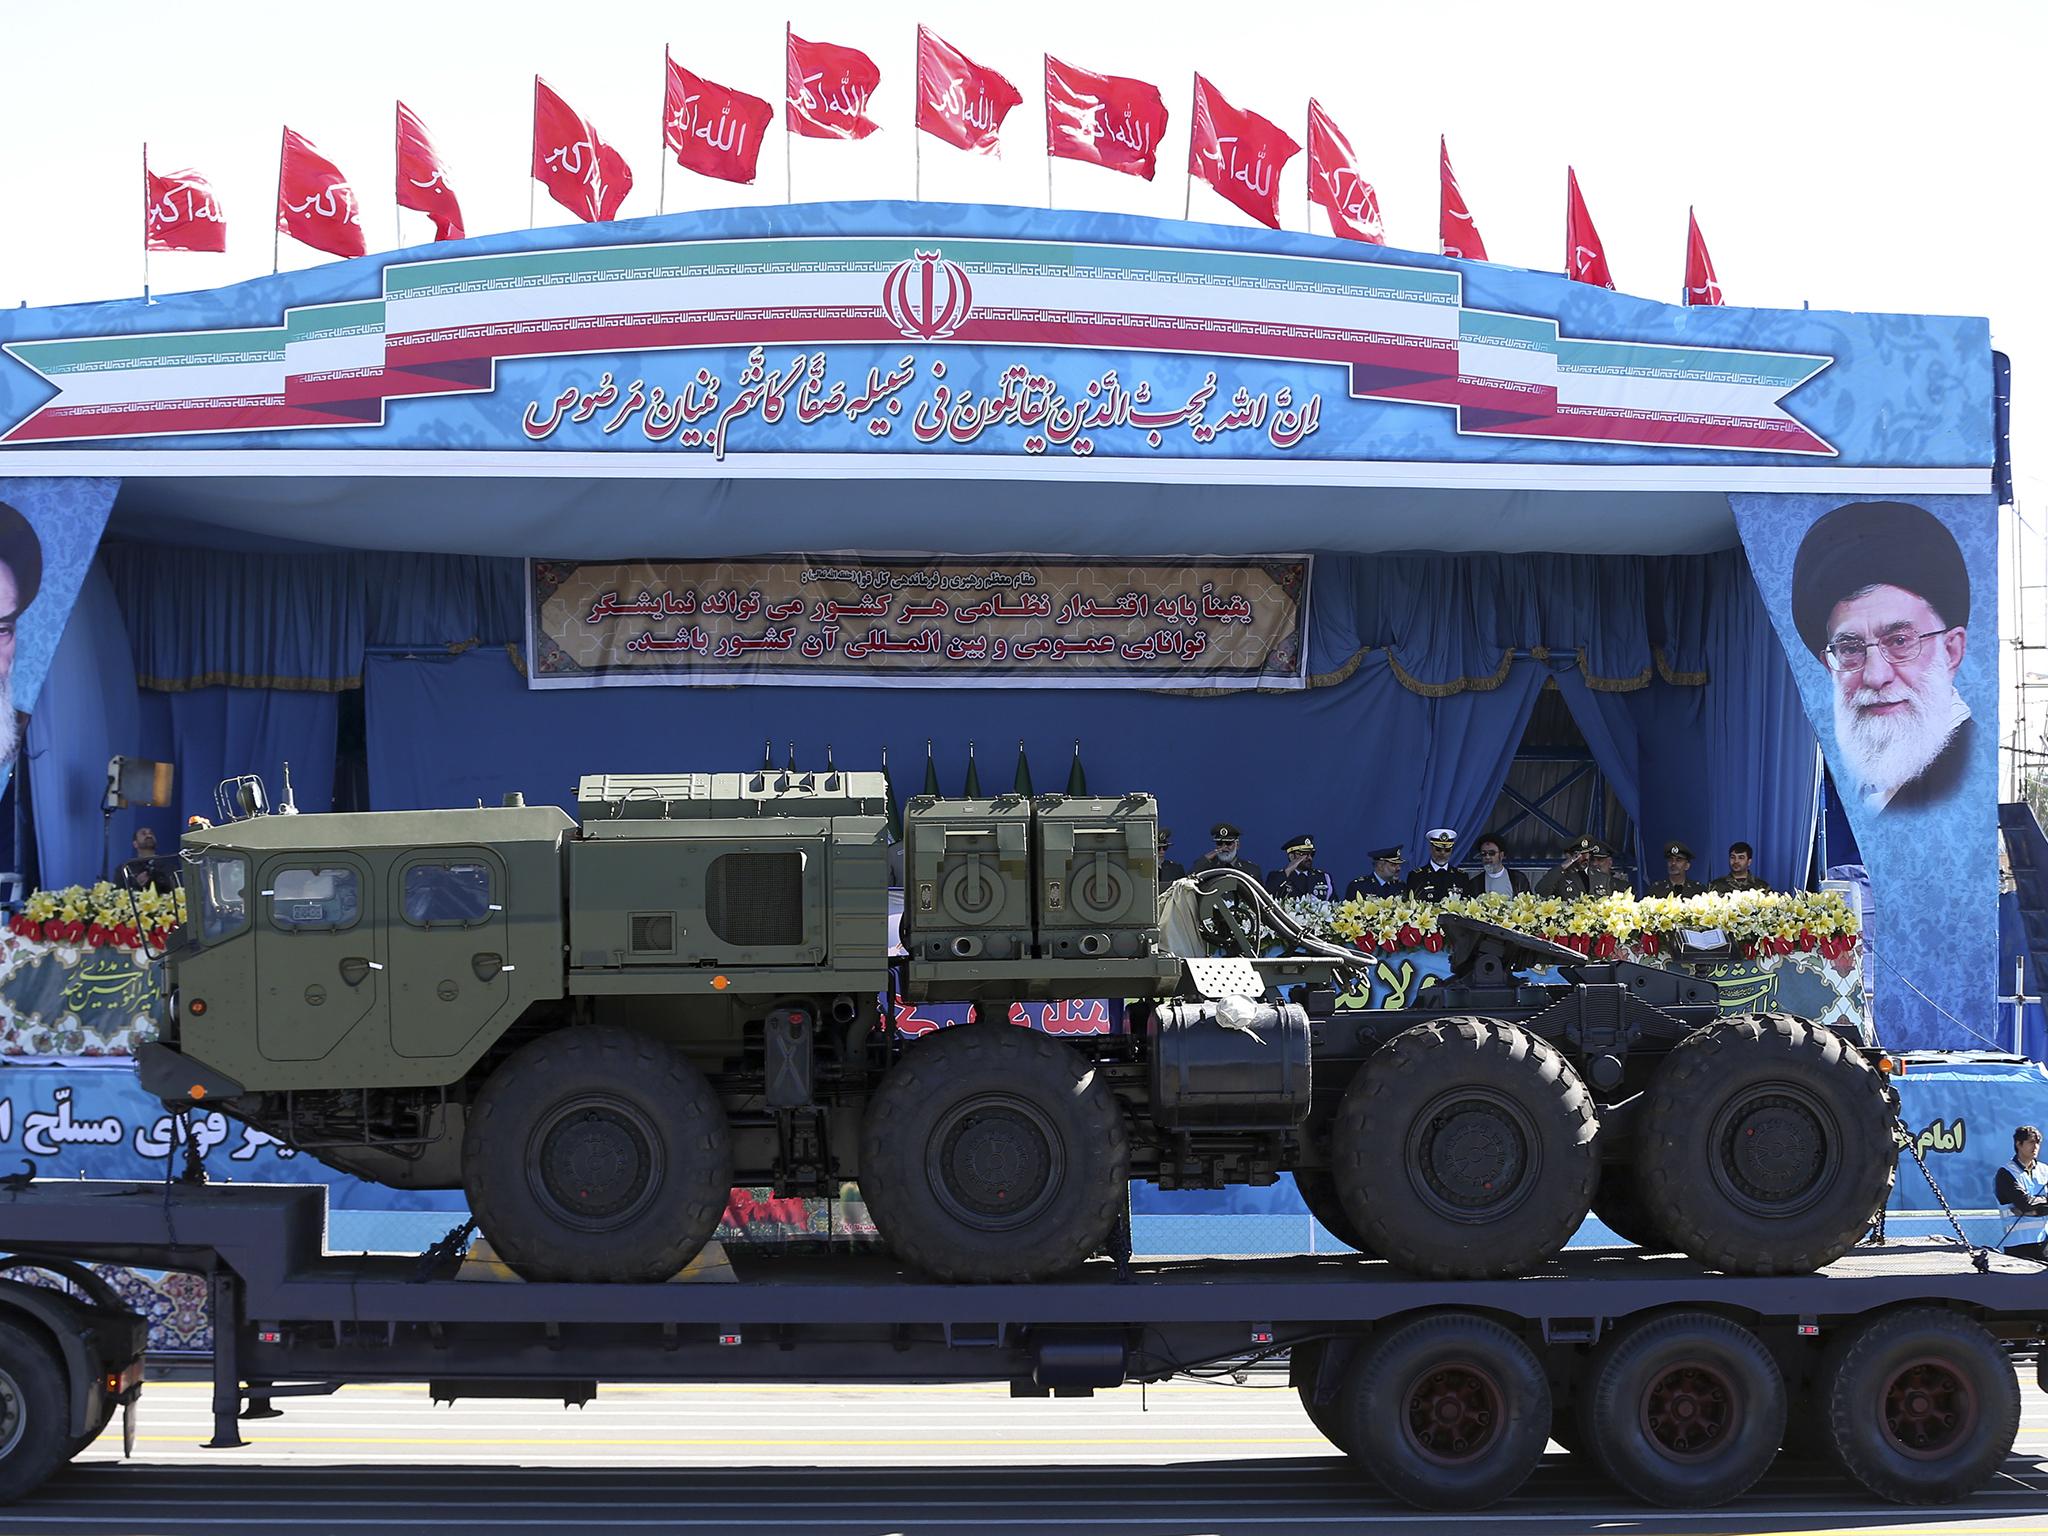 A long-range S-300 missile system from Russia is displayed by Iran's army during a parade